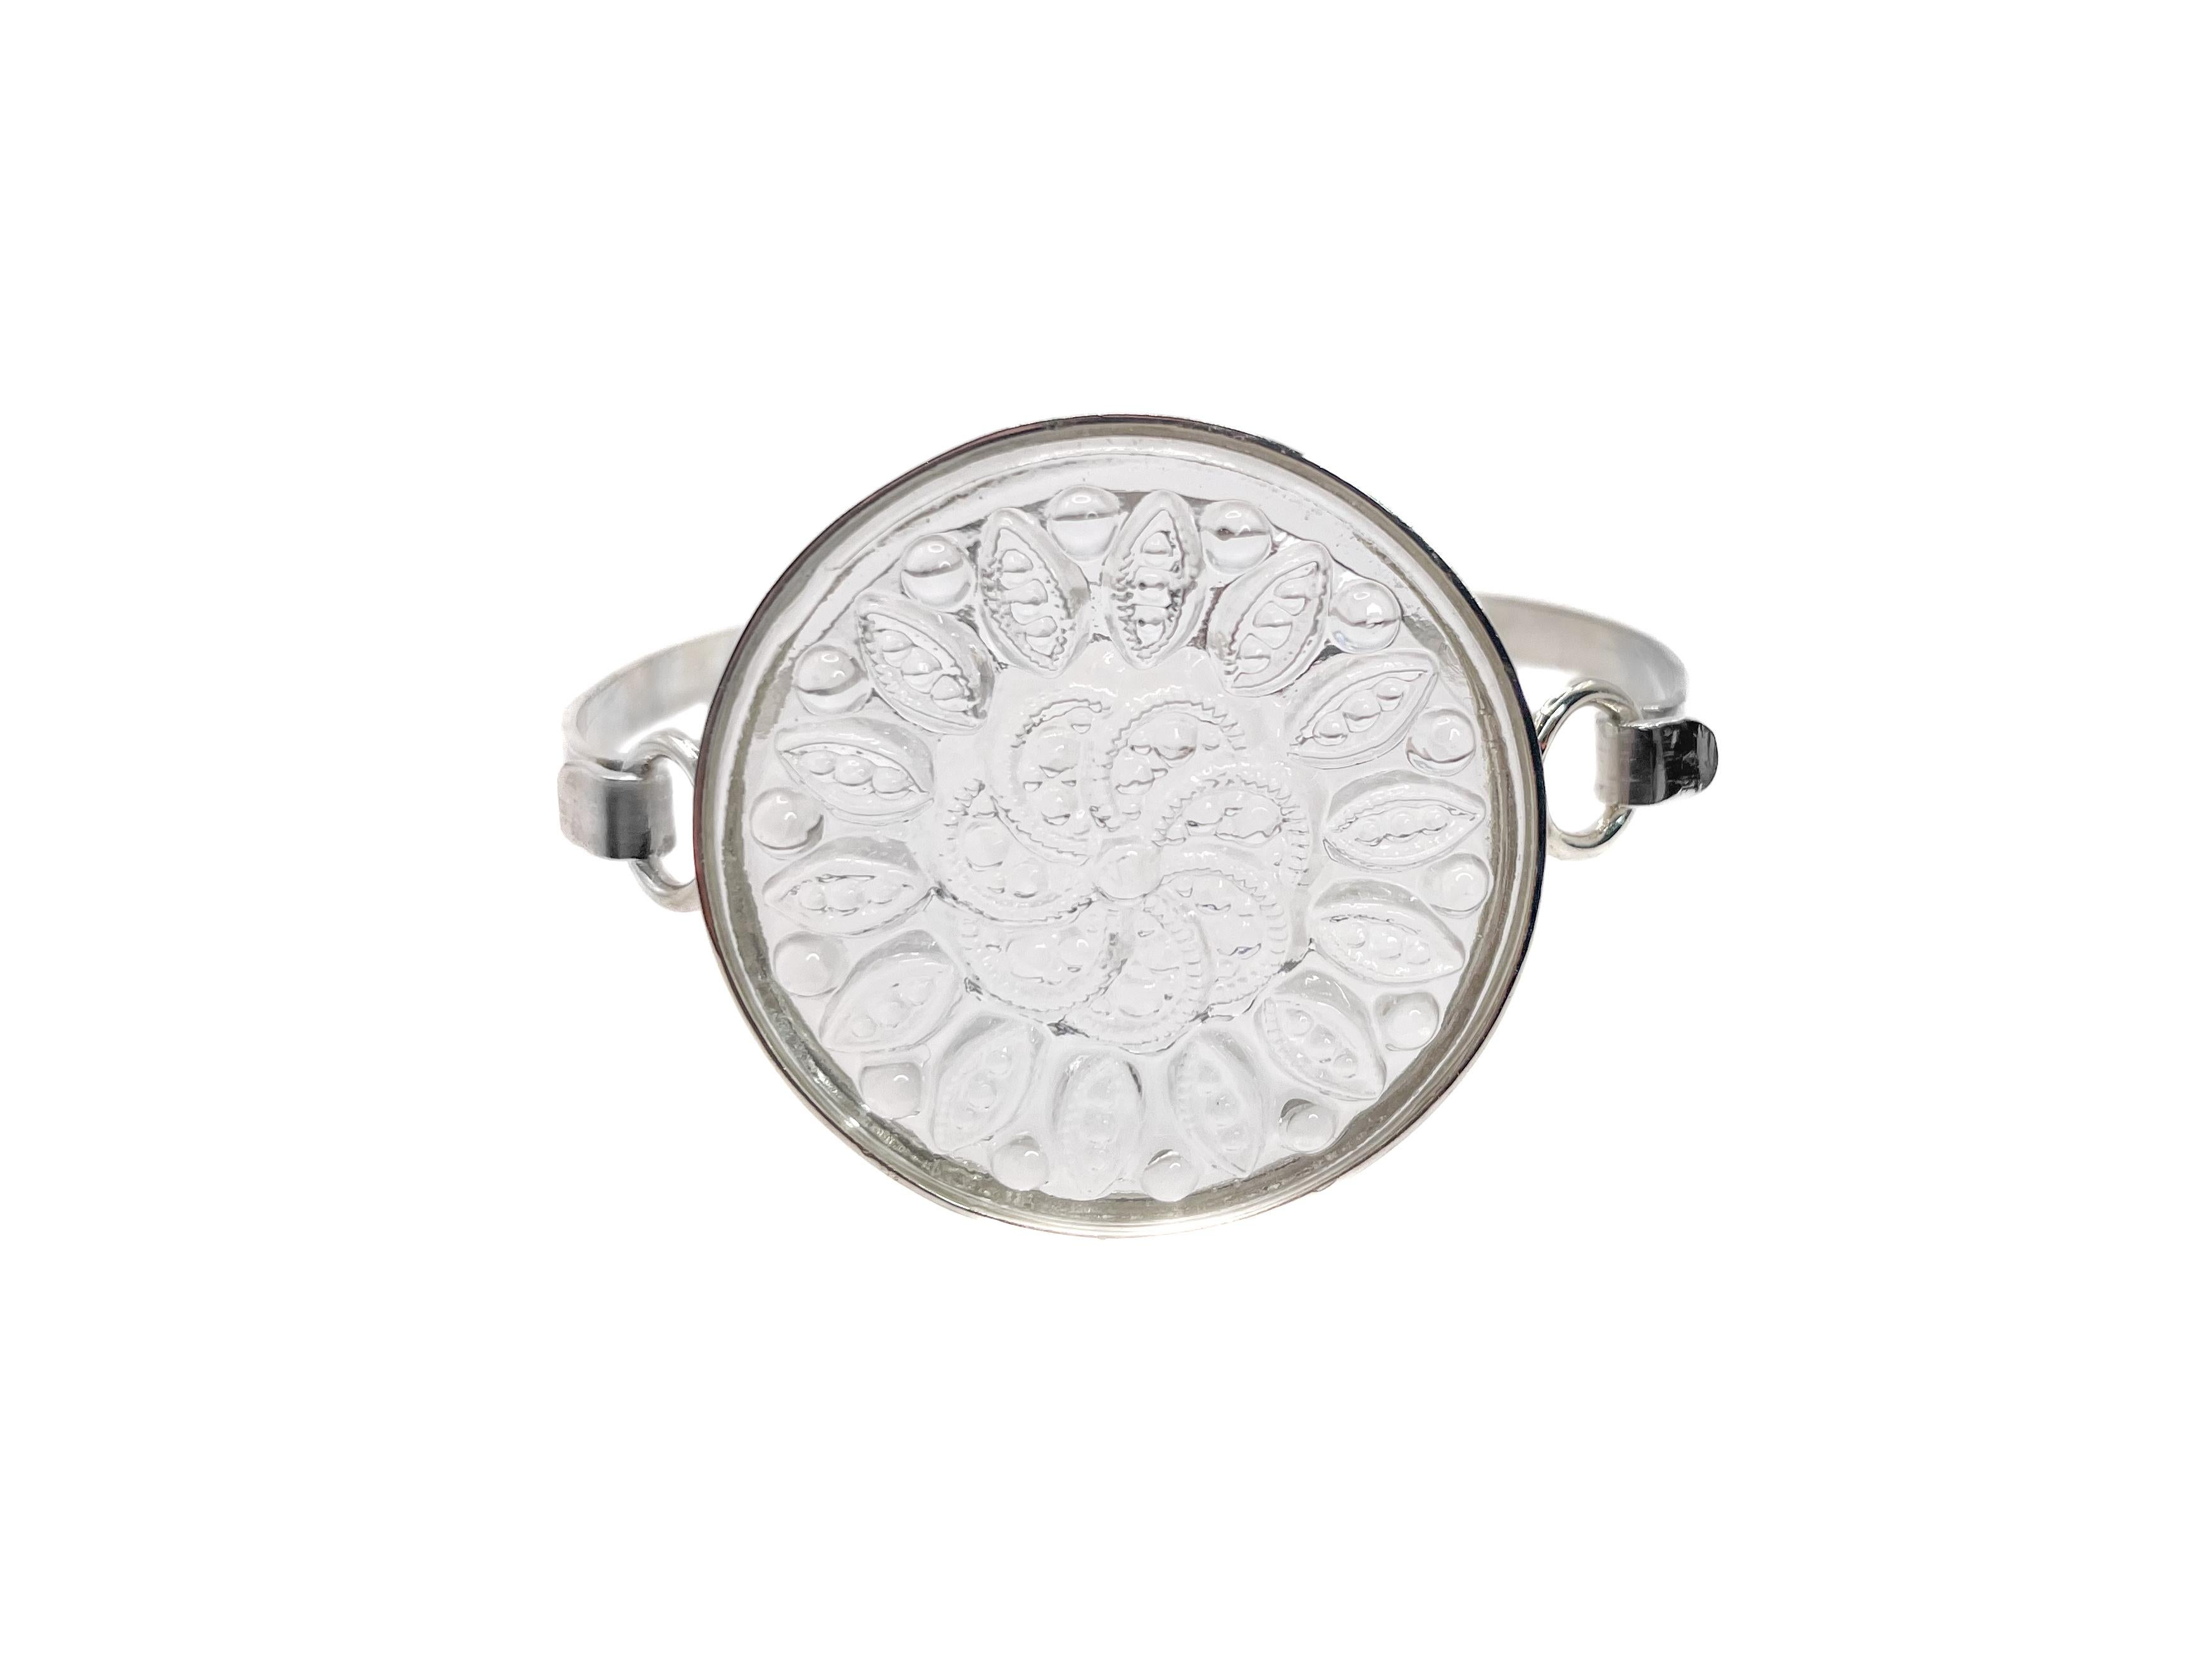 This timeless bracelet, in the style of Lalique, showcases a clear Camellia floral motif glass cabochon from Germany. 

The round molded piece of glass is set in a NEW modern sterling silver setting. It has an elegant and effortless hook clasp. The